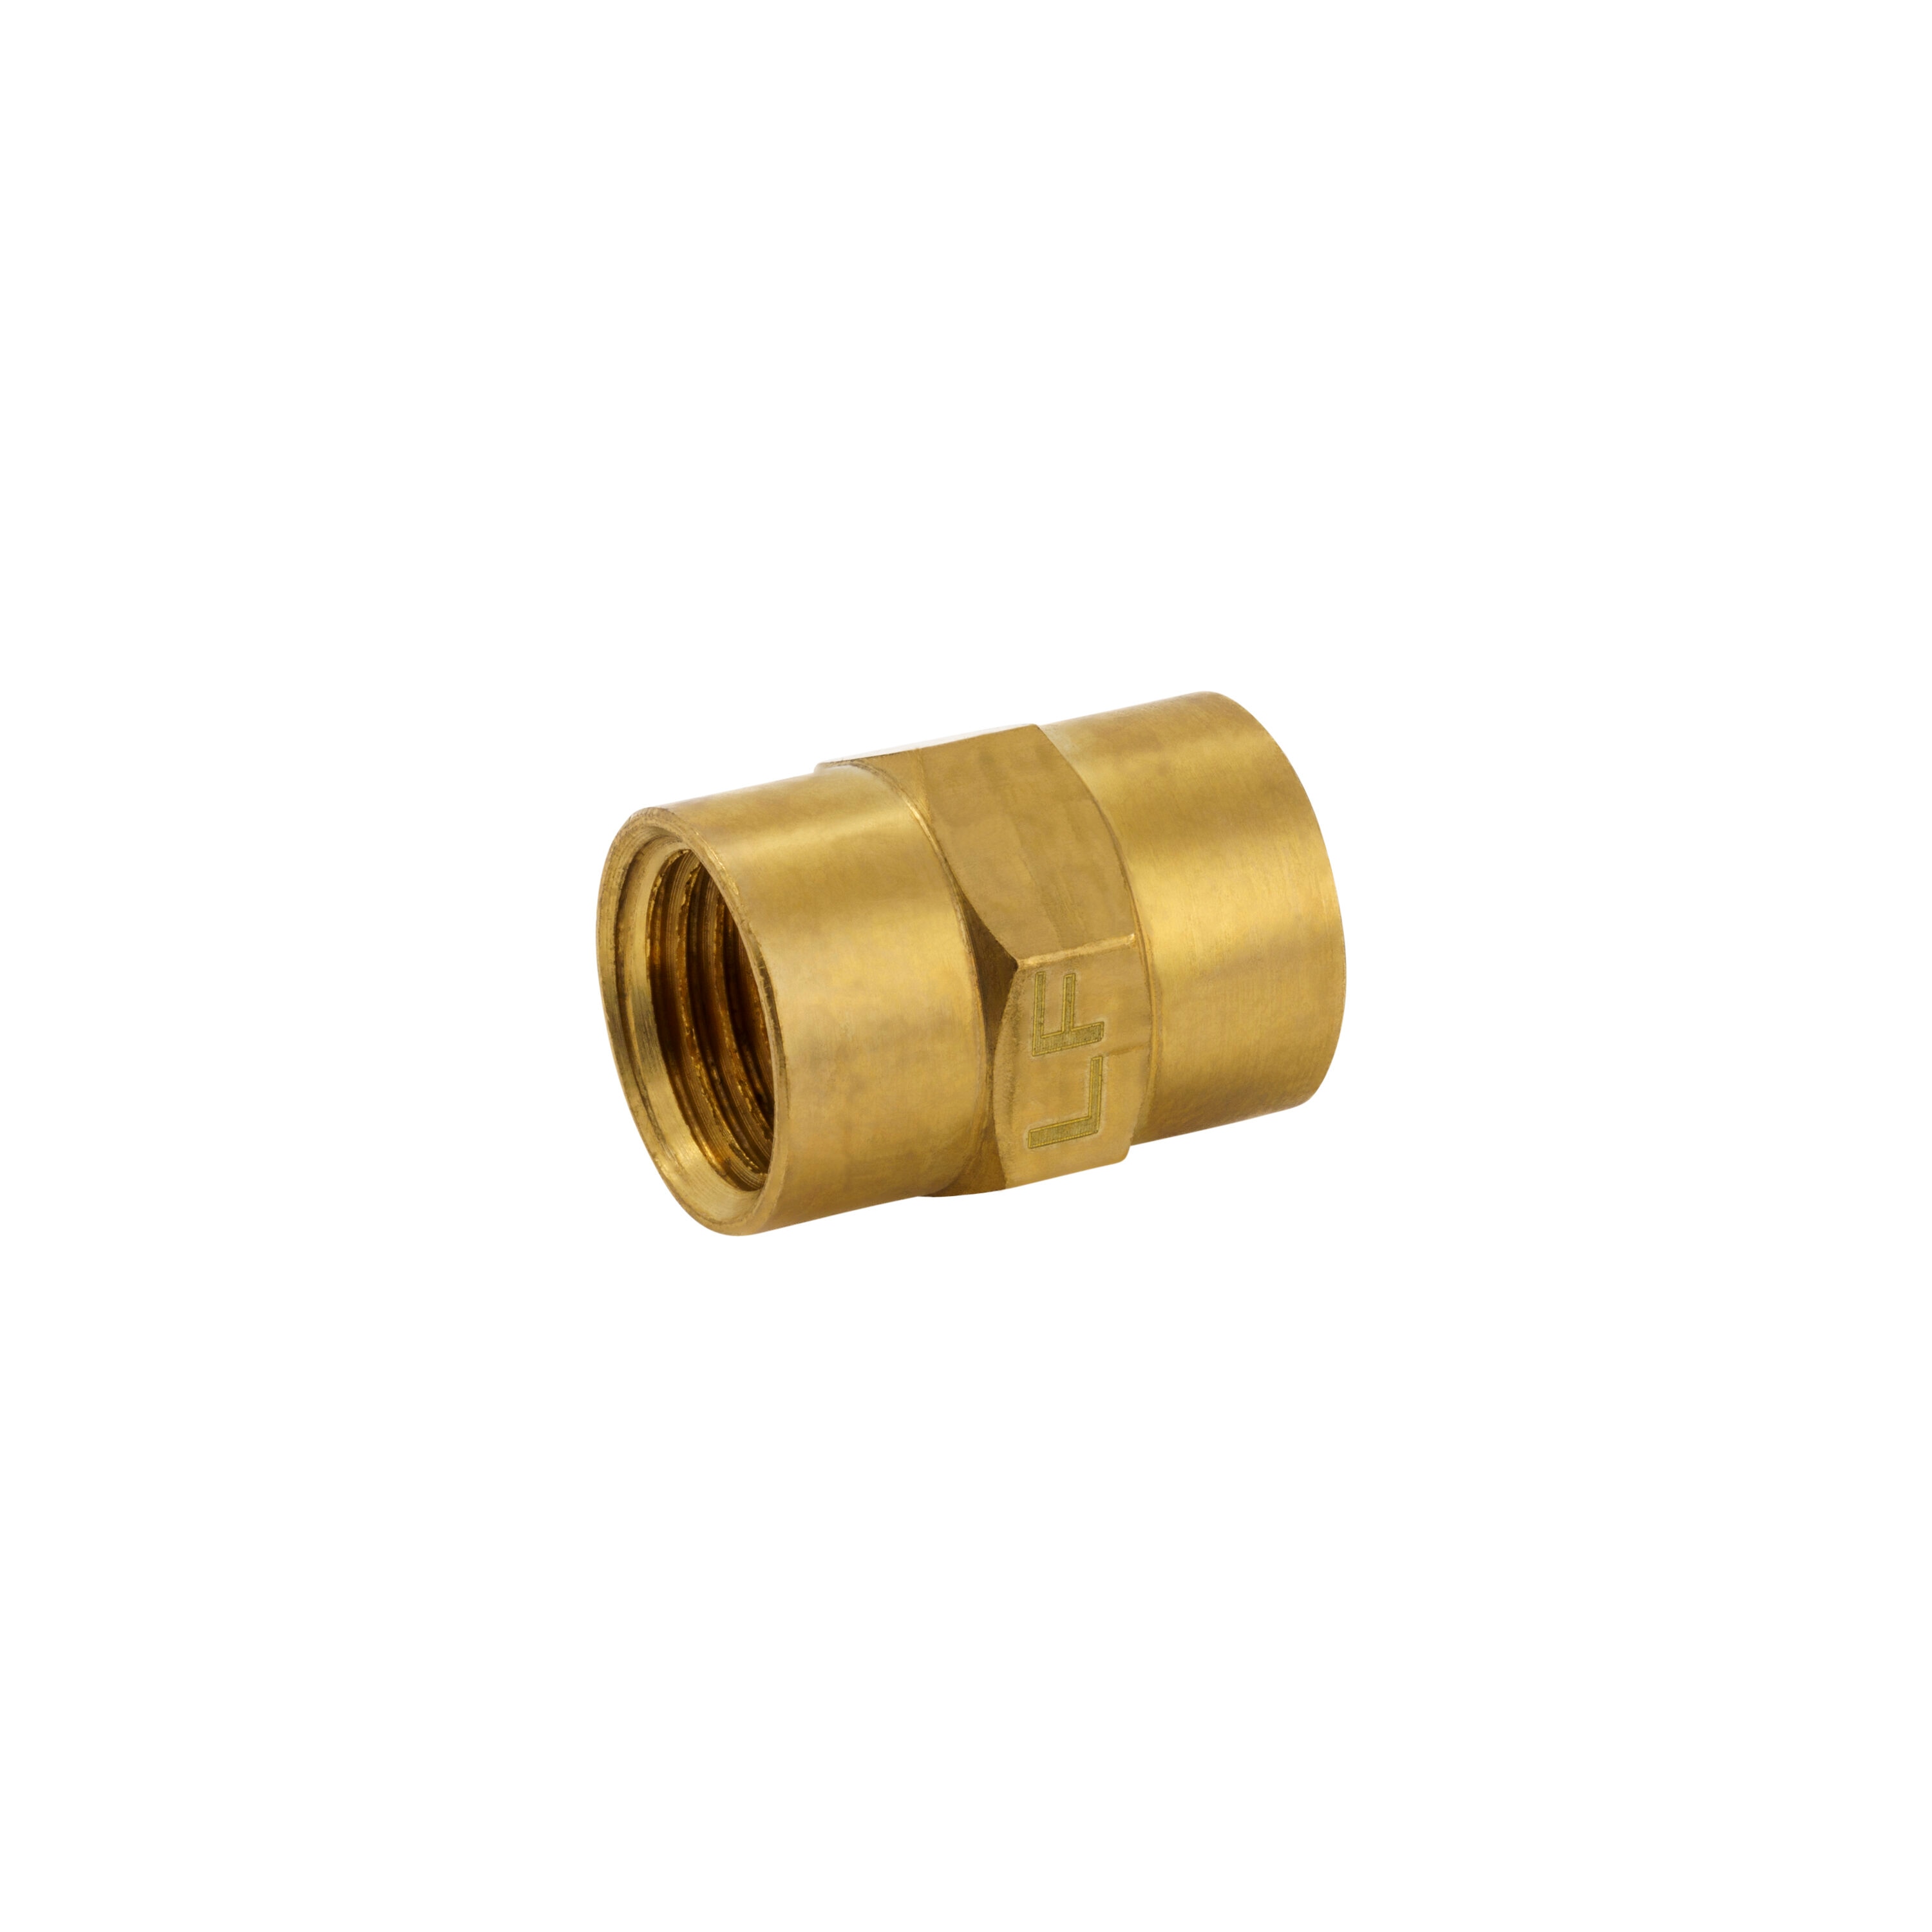 Brass Pipe Fittings: Ball Seat Union (NPSM Thread)